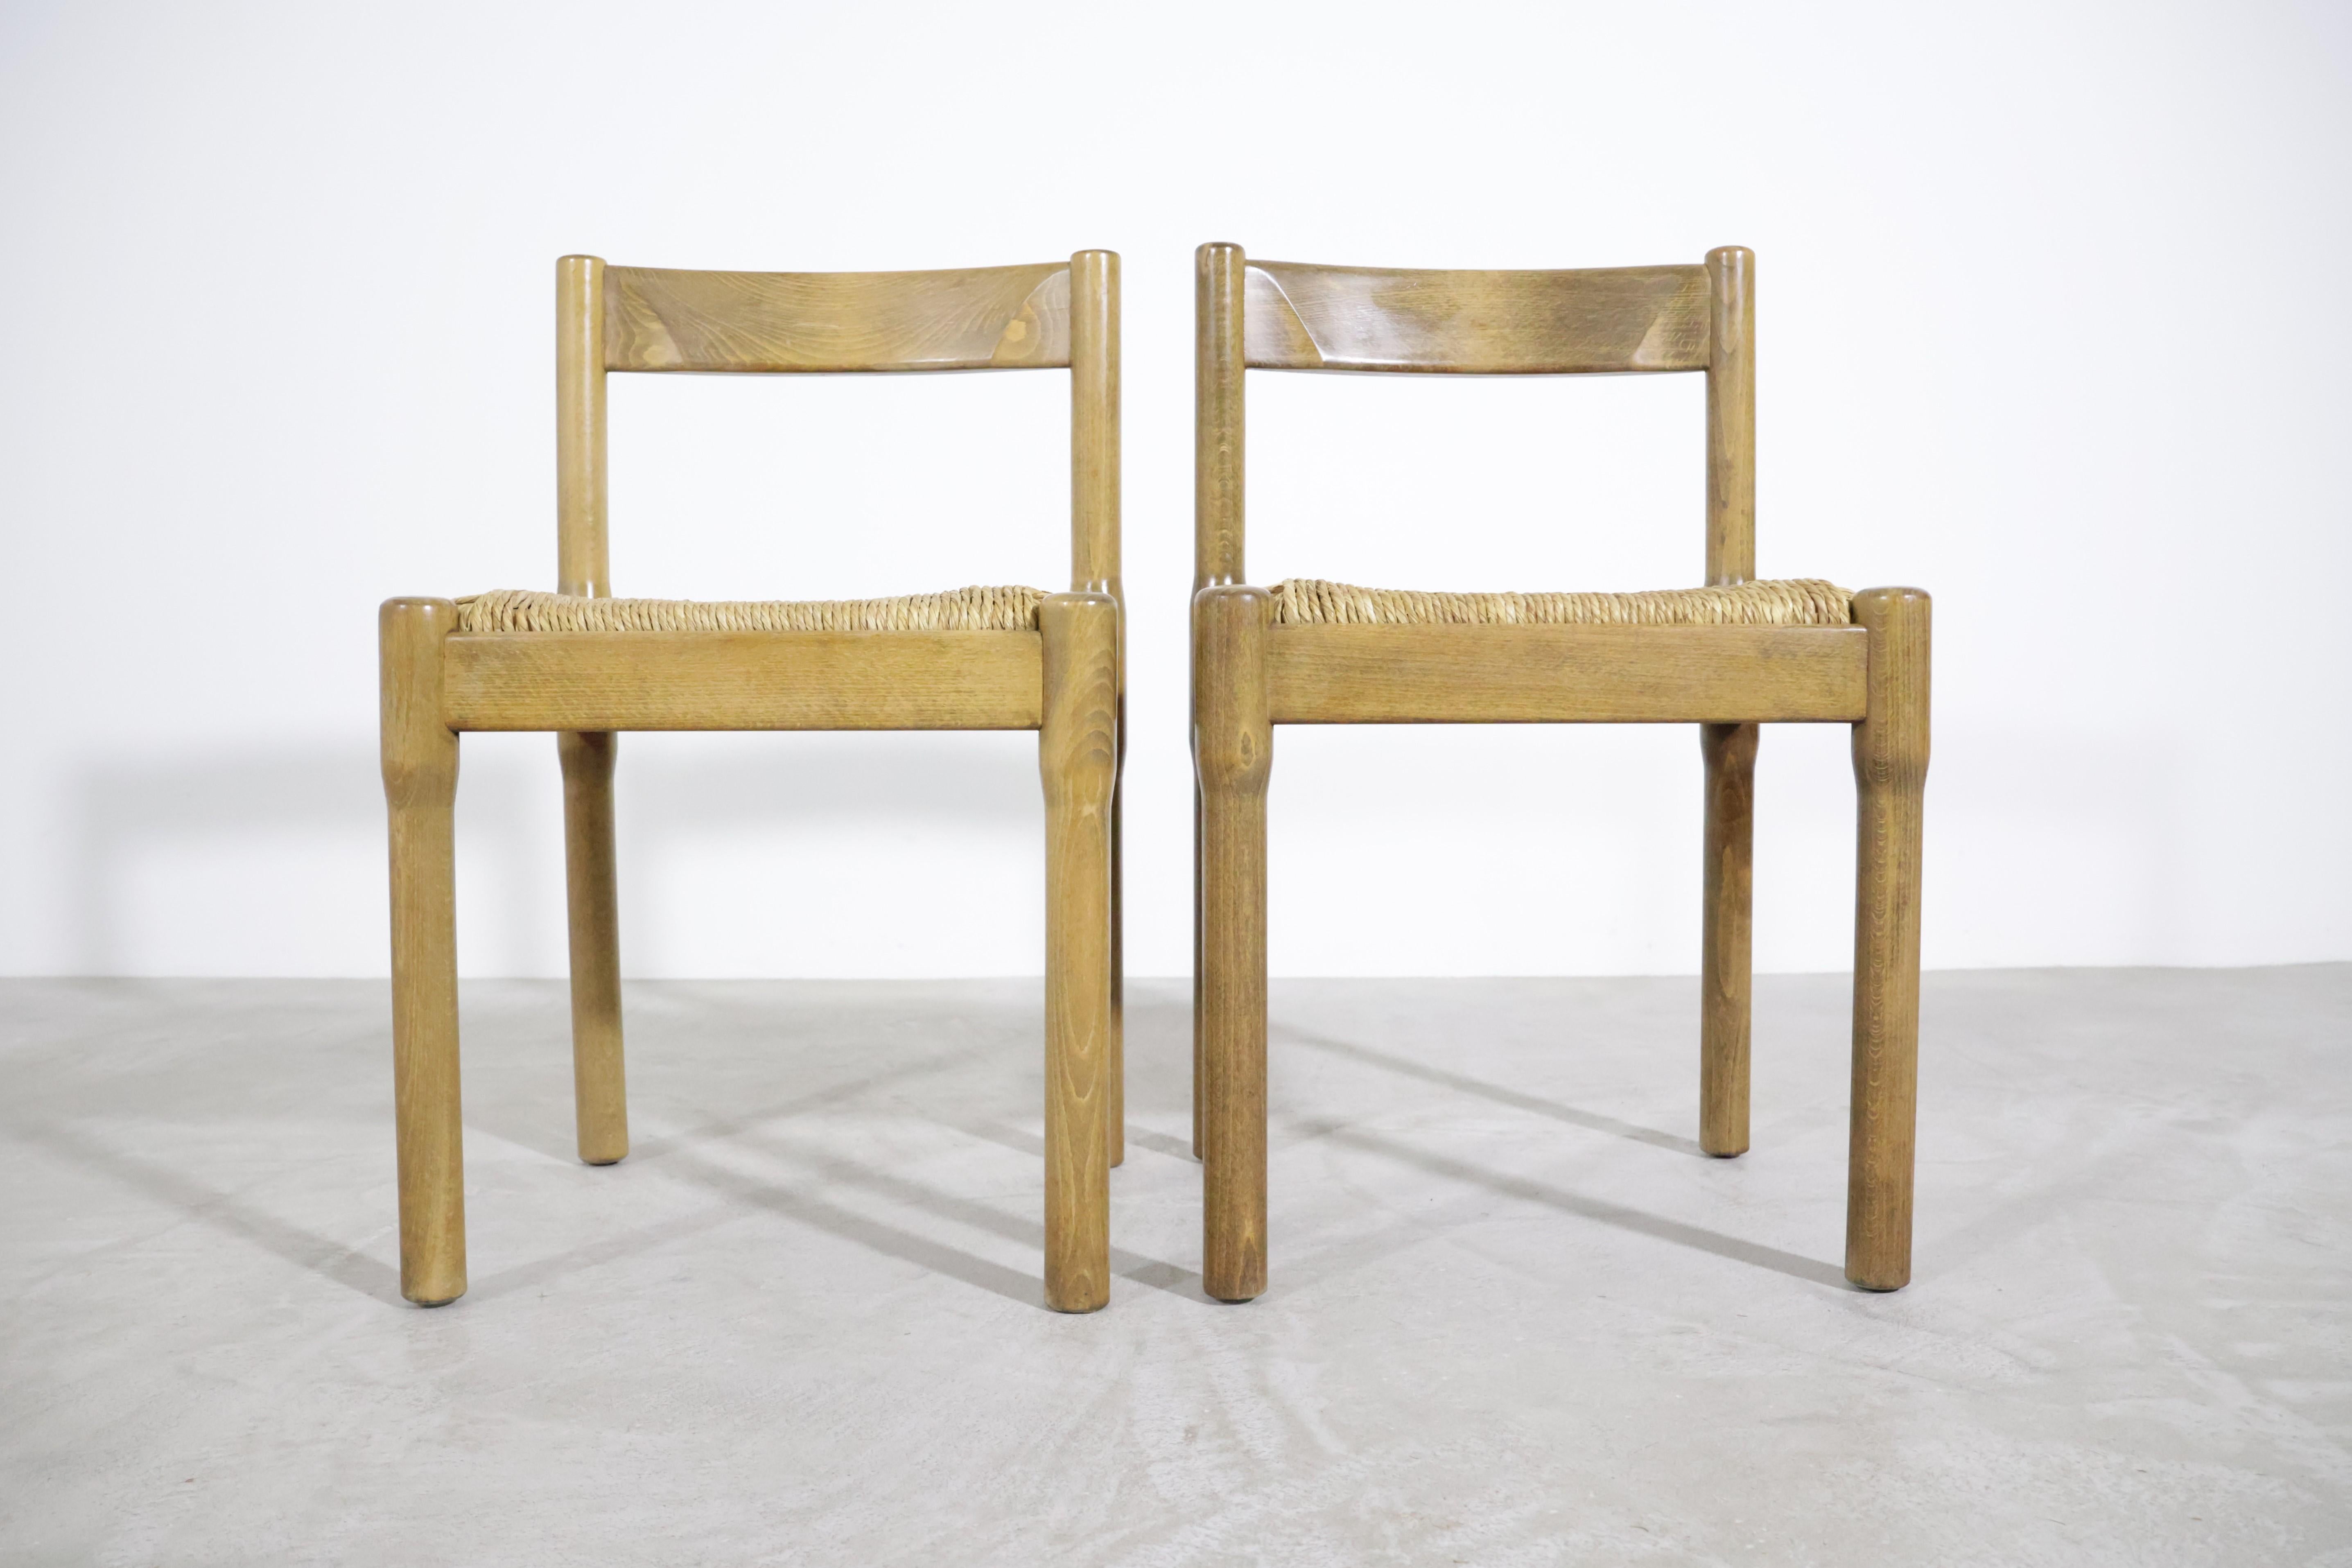 A beautiful set of two 'Carimate' dining chairs by Vico Magistretti for Mario Luigi Comi/Italy in the 60s!
The 'Carimate' chair is one of Vico Magistretti's most famous chair and for him, rather unsual, as his furniture is better known for the